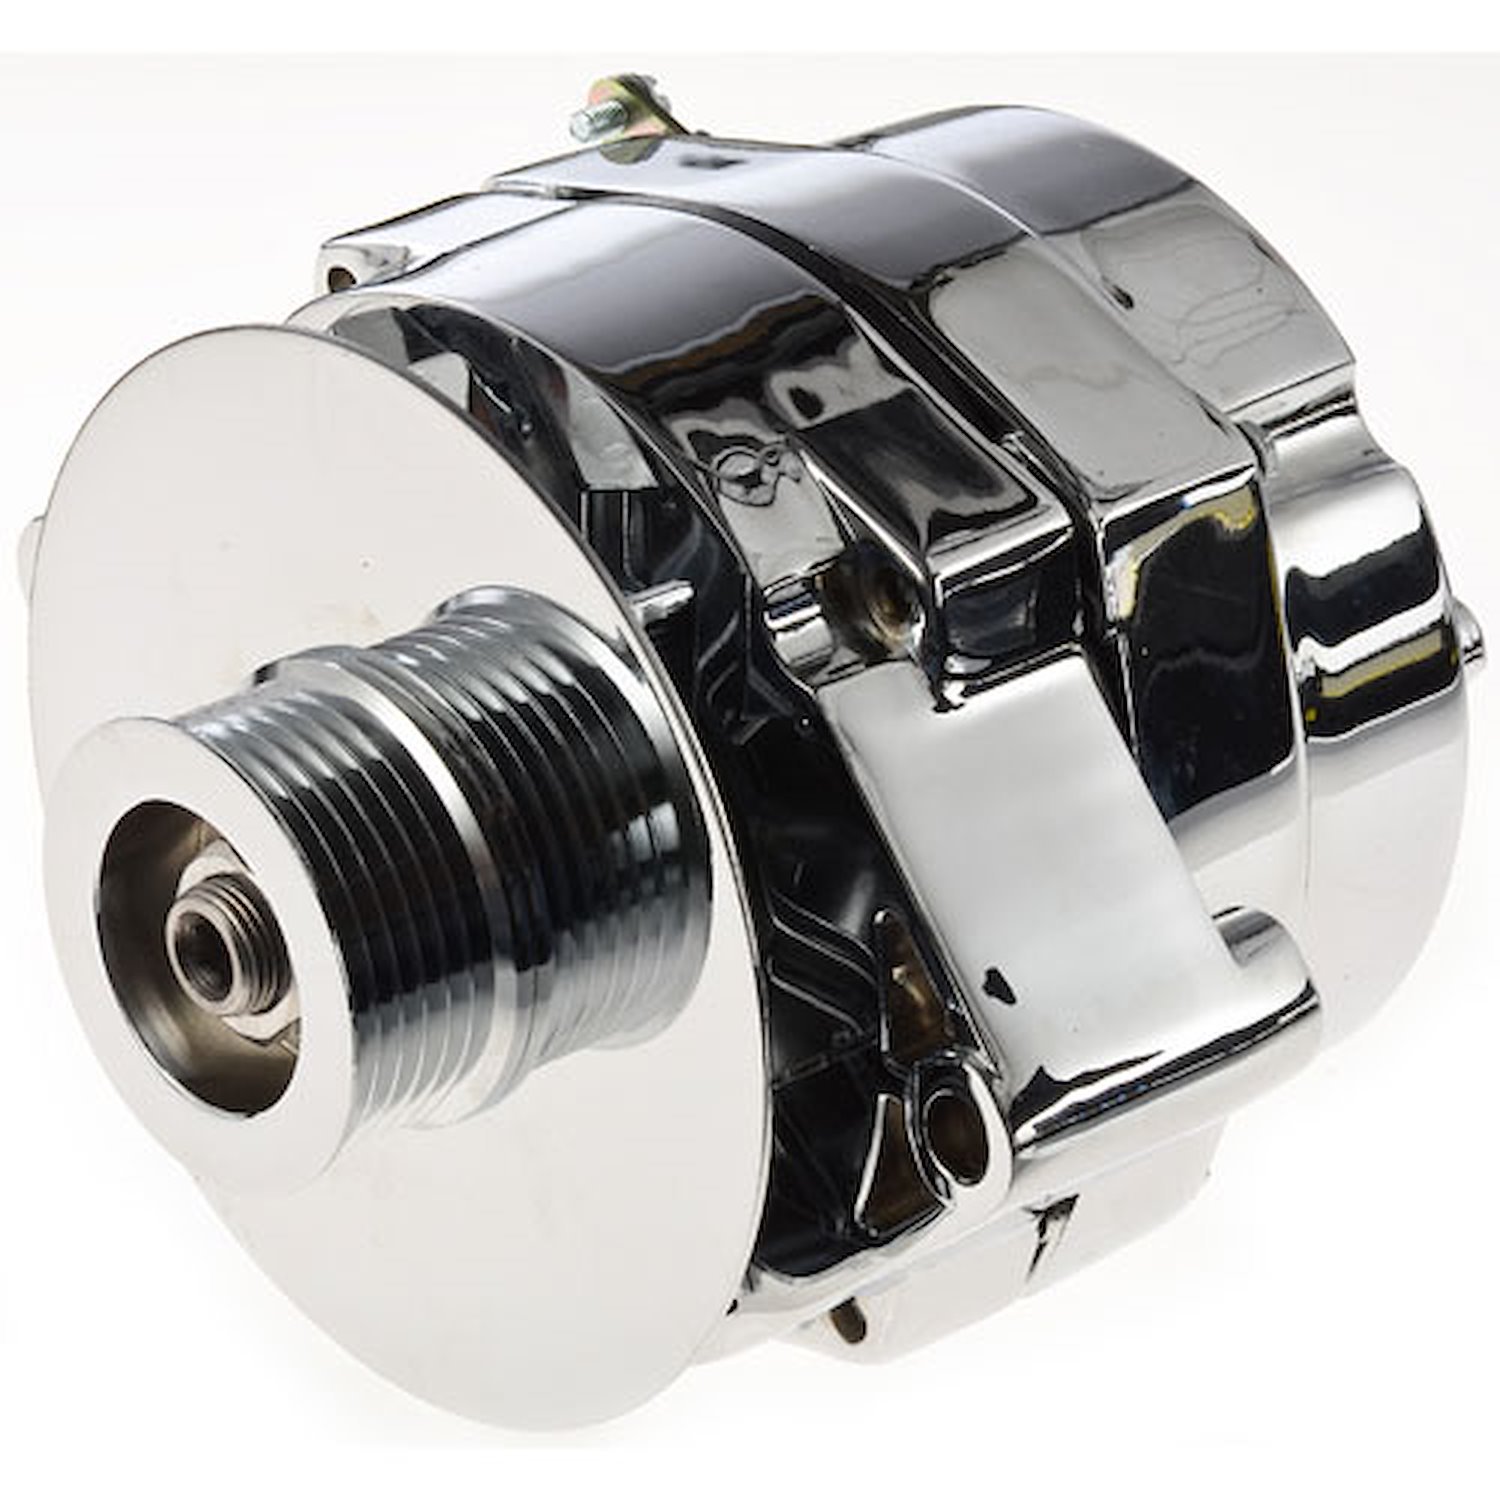 1-Wire GM Alternator 100 amps Serpentine Pulley [Chrome Plated Finish]